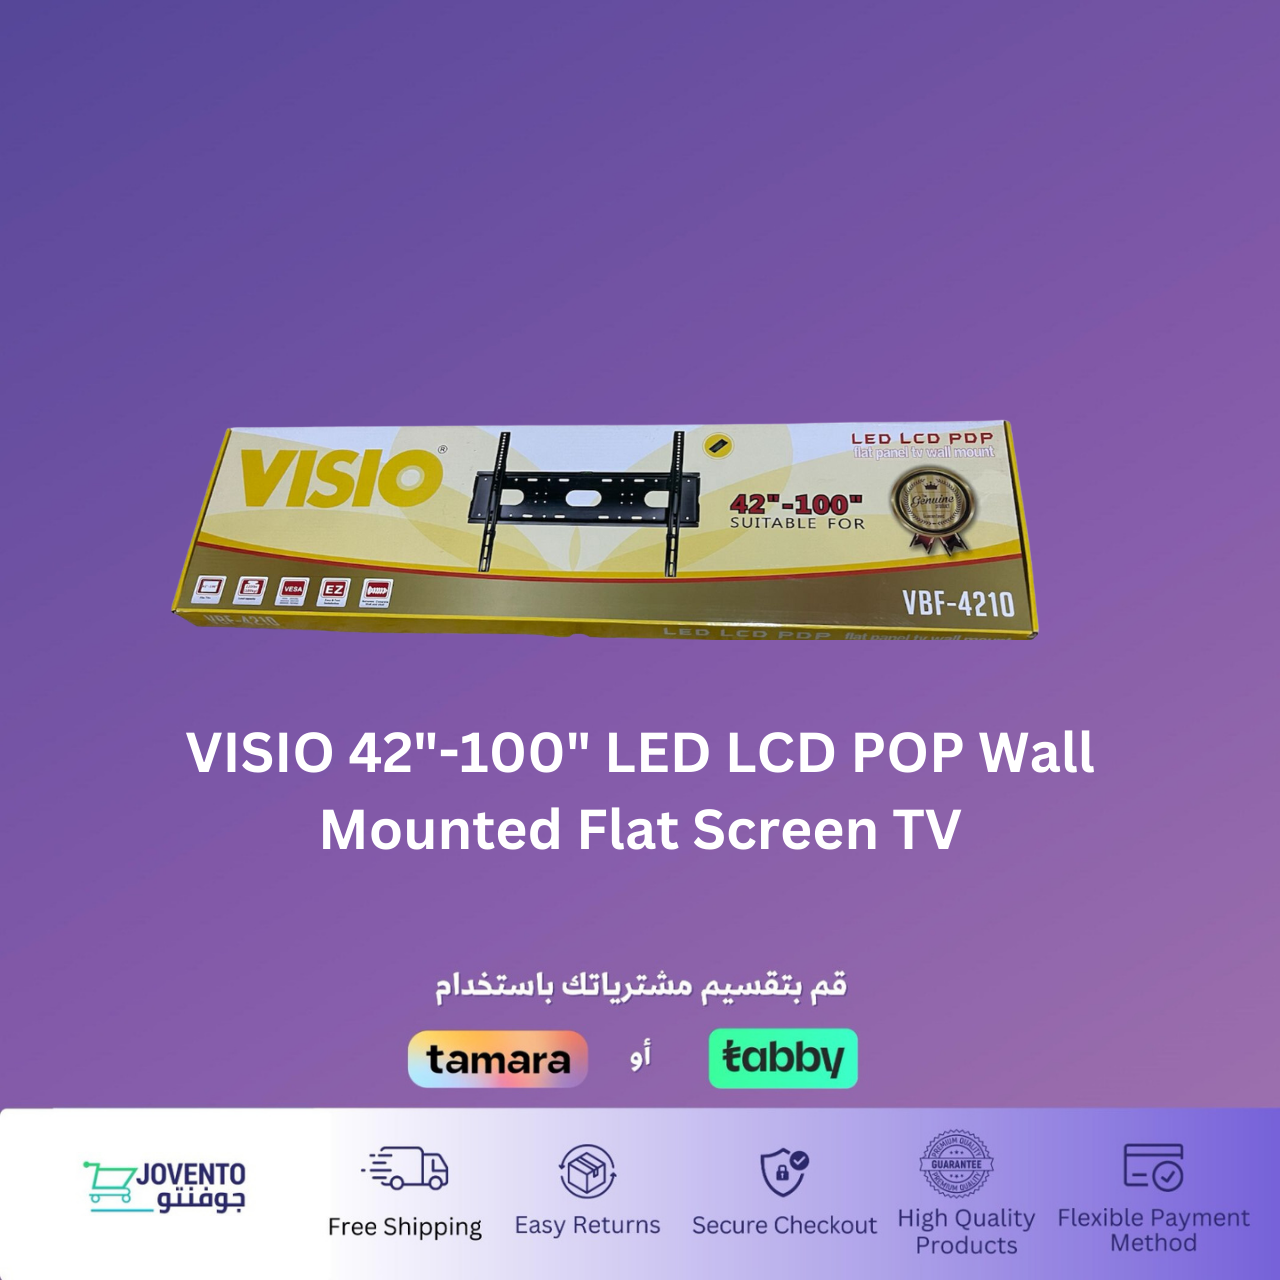 VISIO 42"-100" POP TV Wall Mount - LED LCD